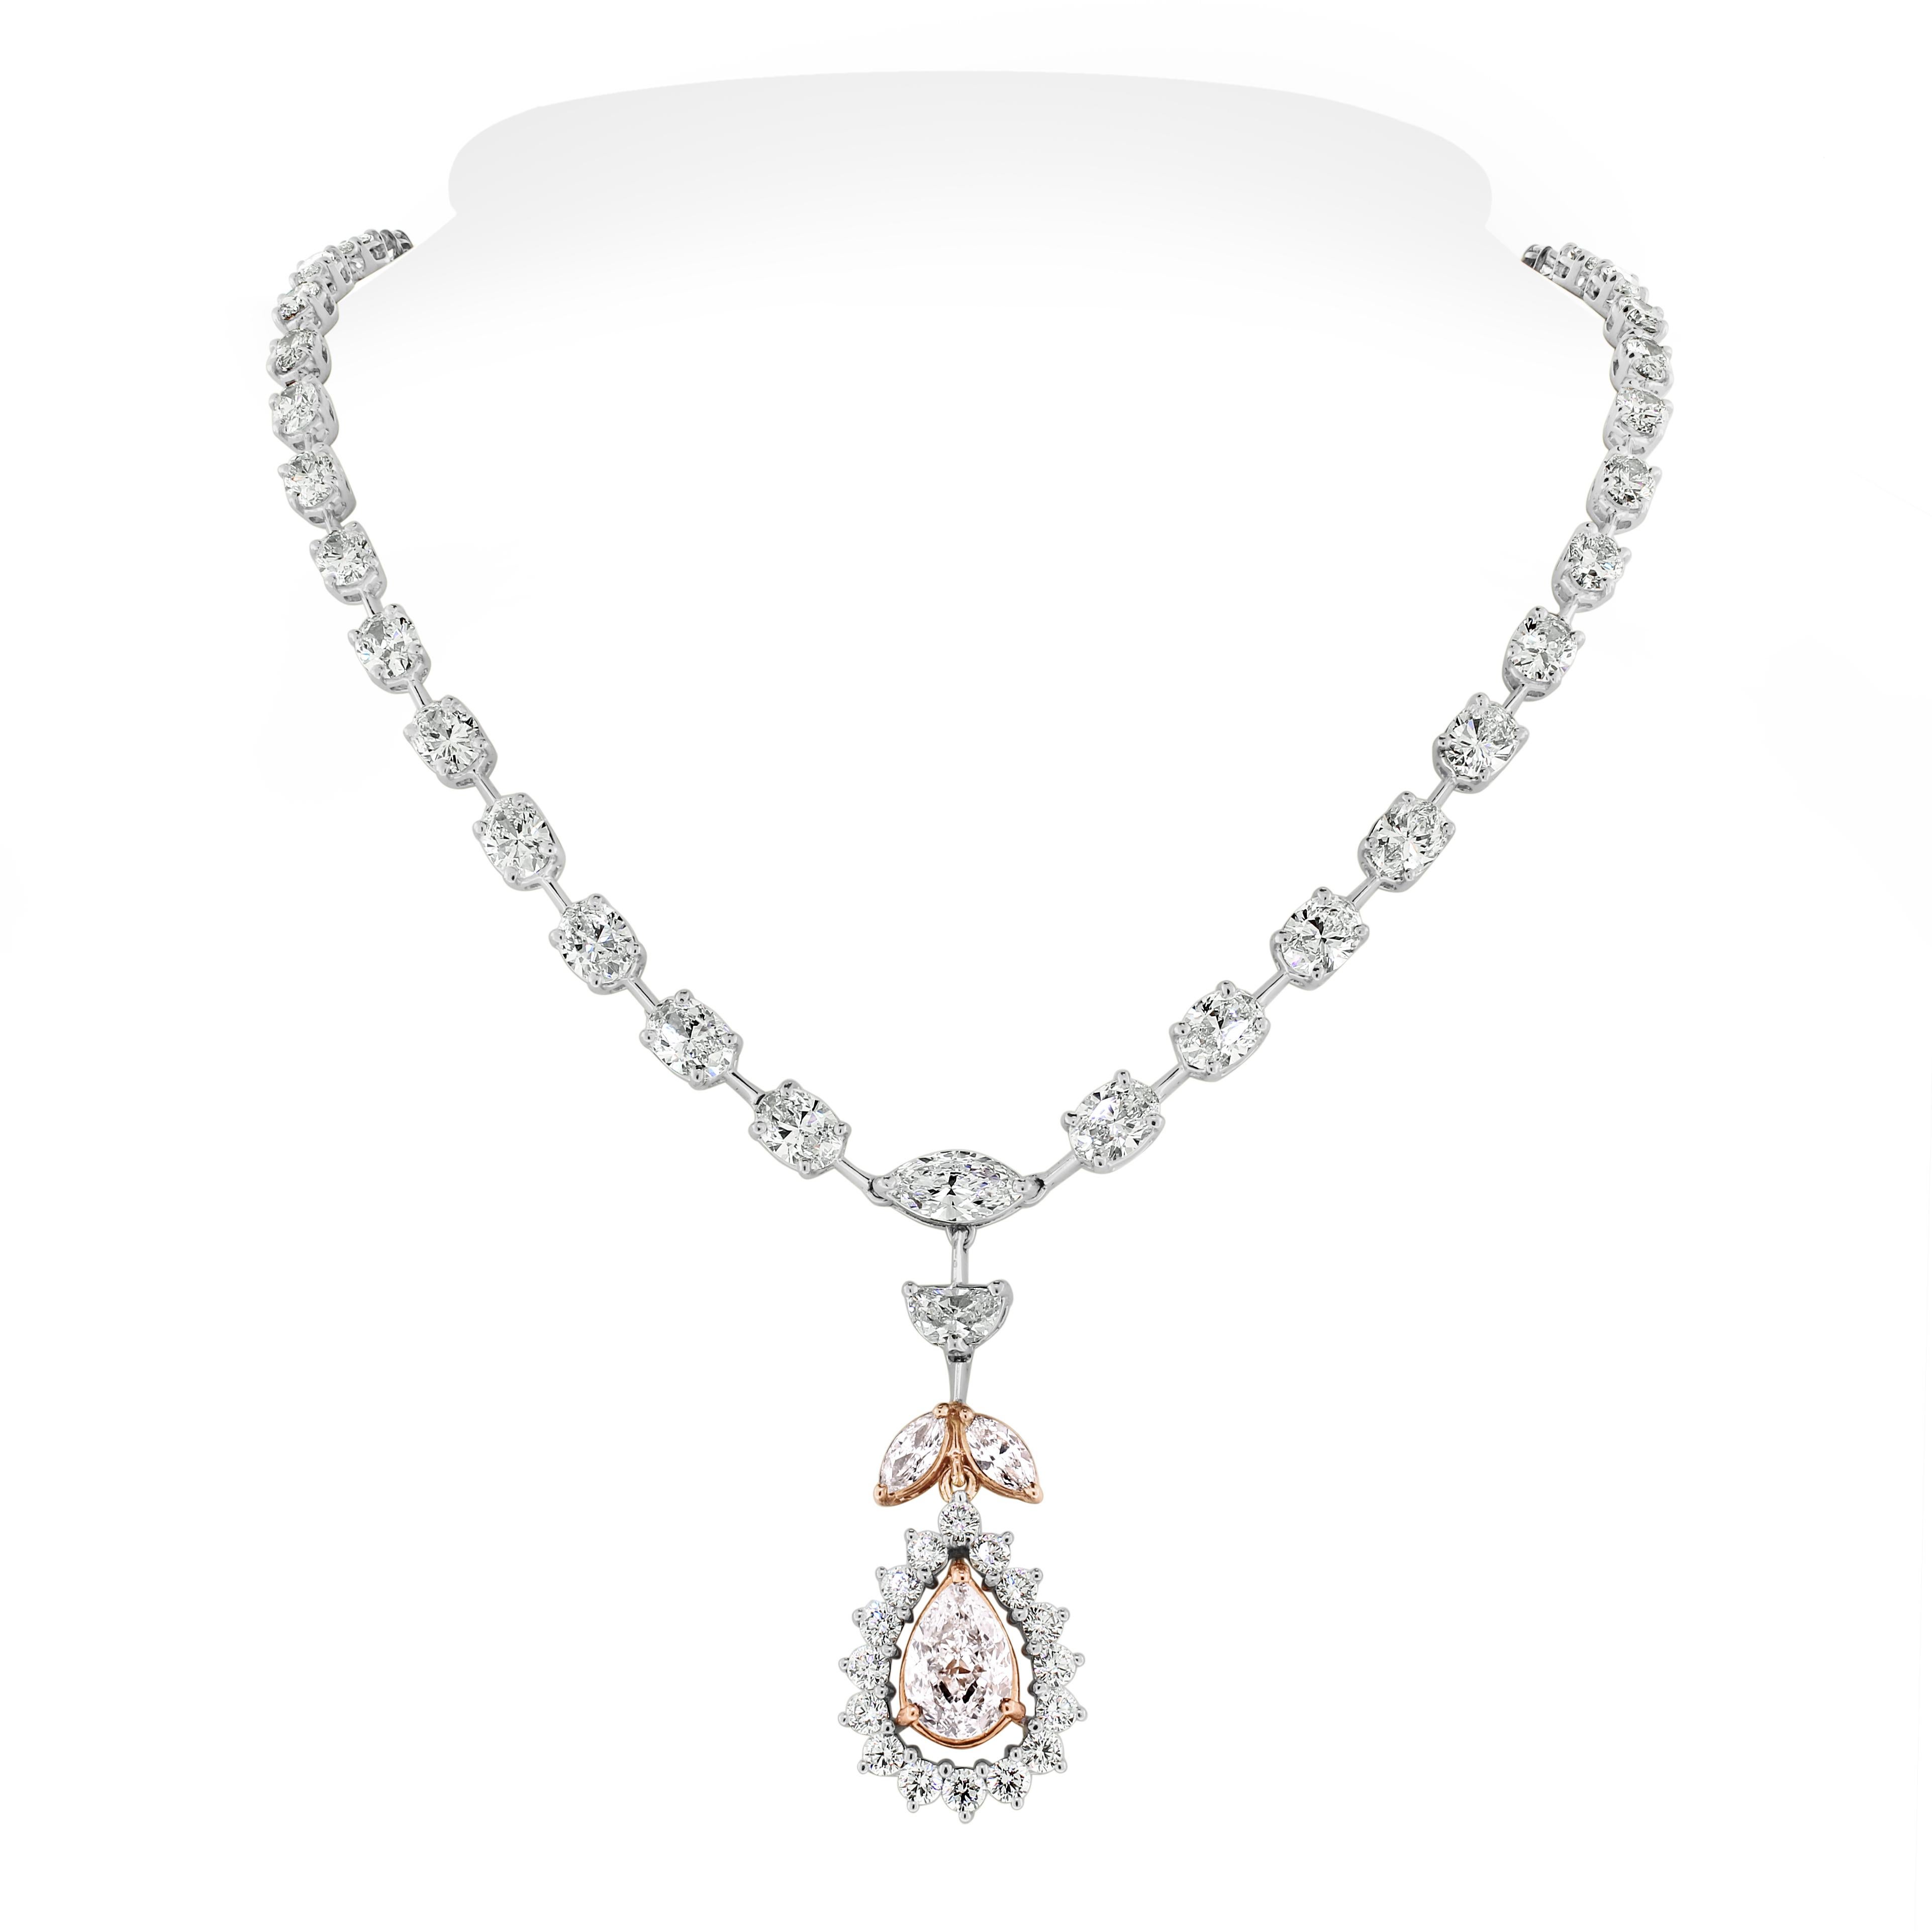 Beauvince Maira Diamond Necklace '19.26 ct Diamonds' in Gold In New Condition For Sale In New York, NY